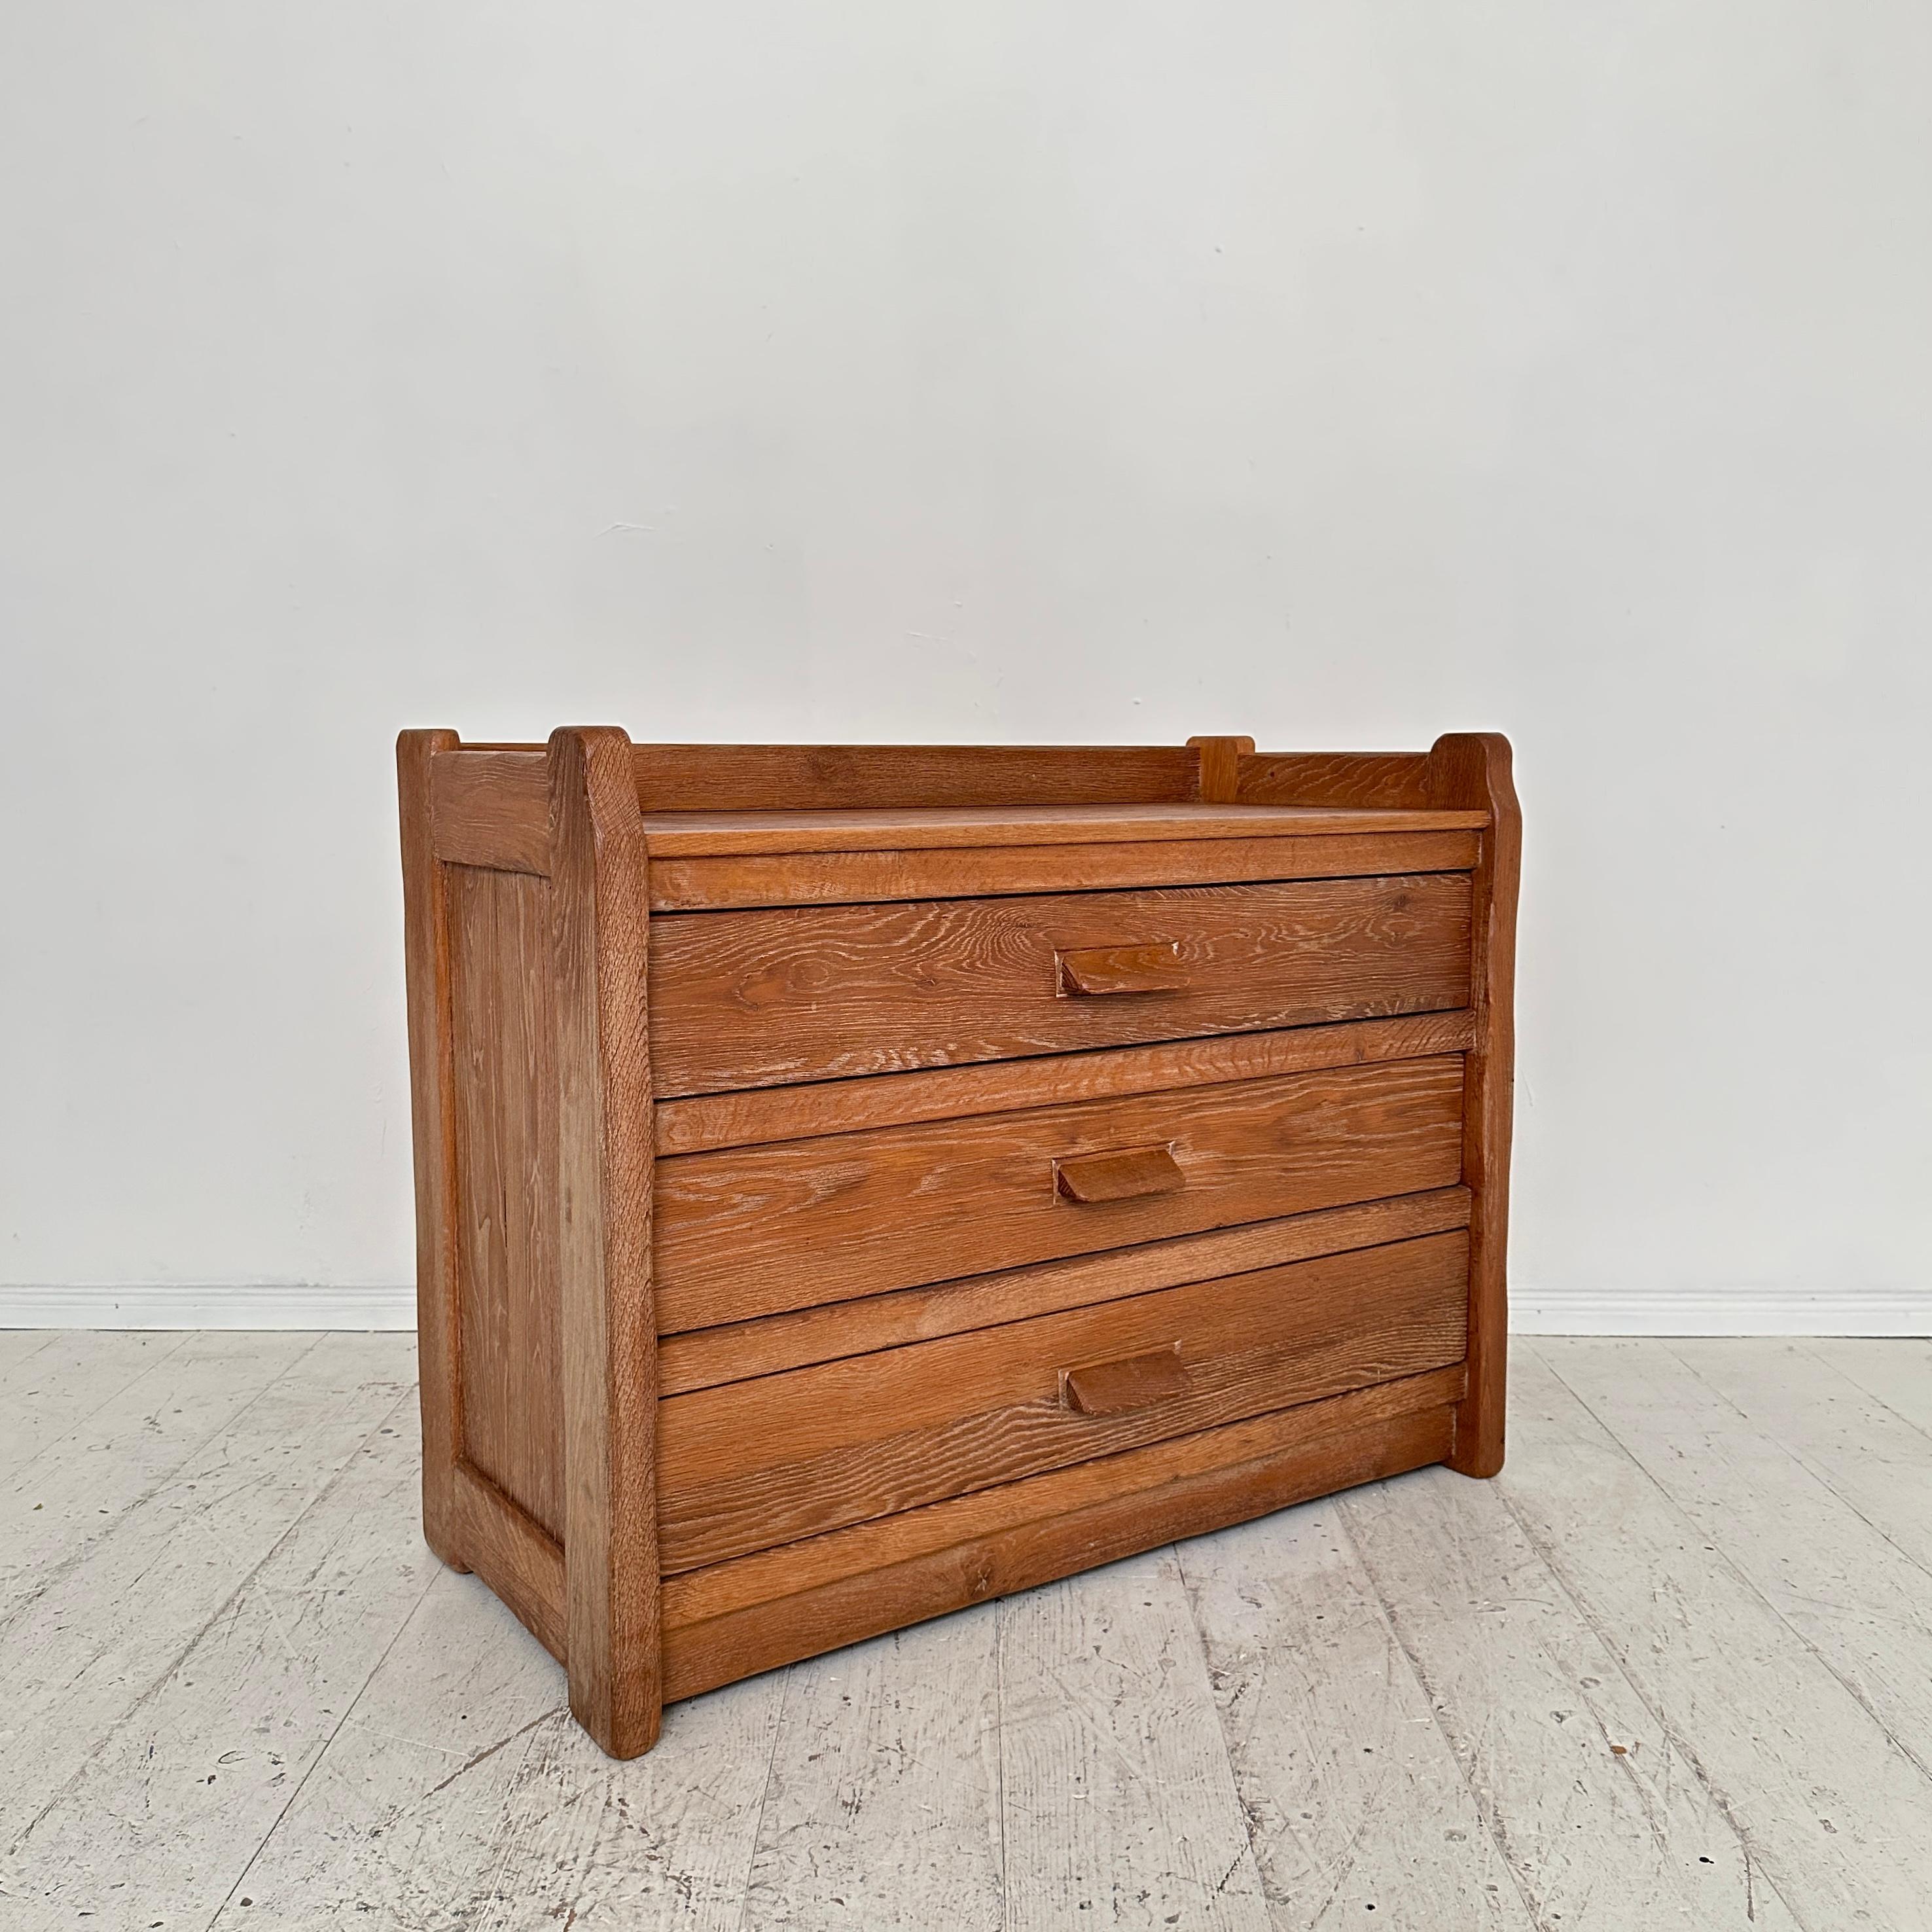 1970s Brutalist Chest of Drawers in Solid Washed Oak by de Puydt, around 1974 For Sale 1